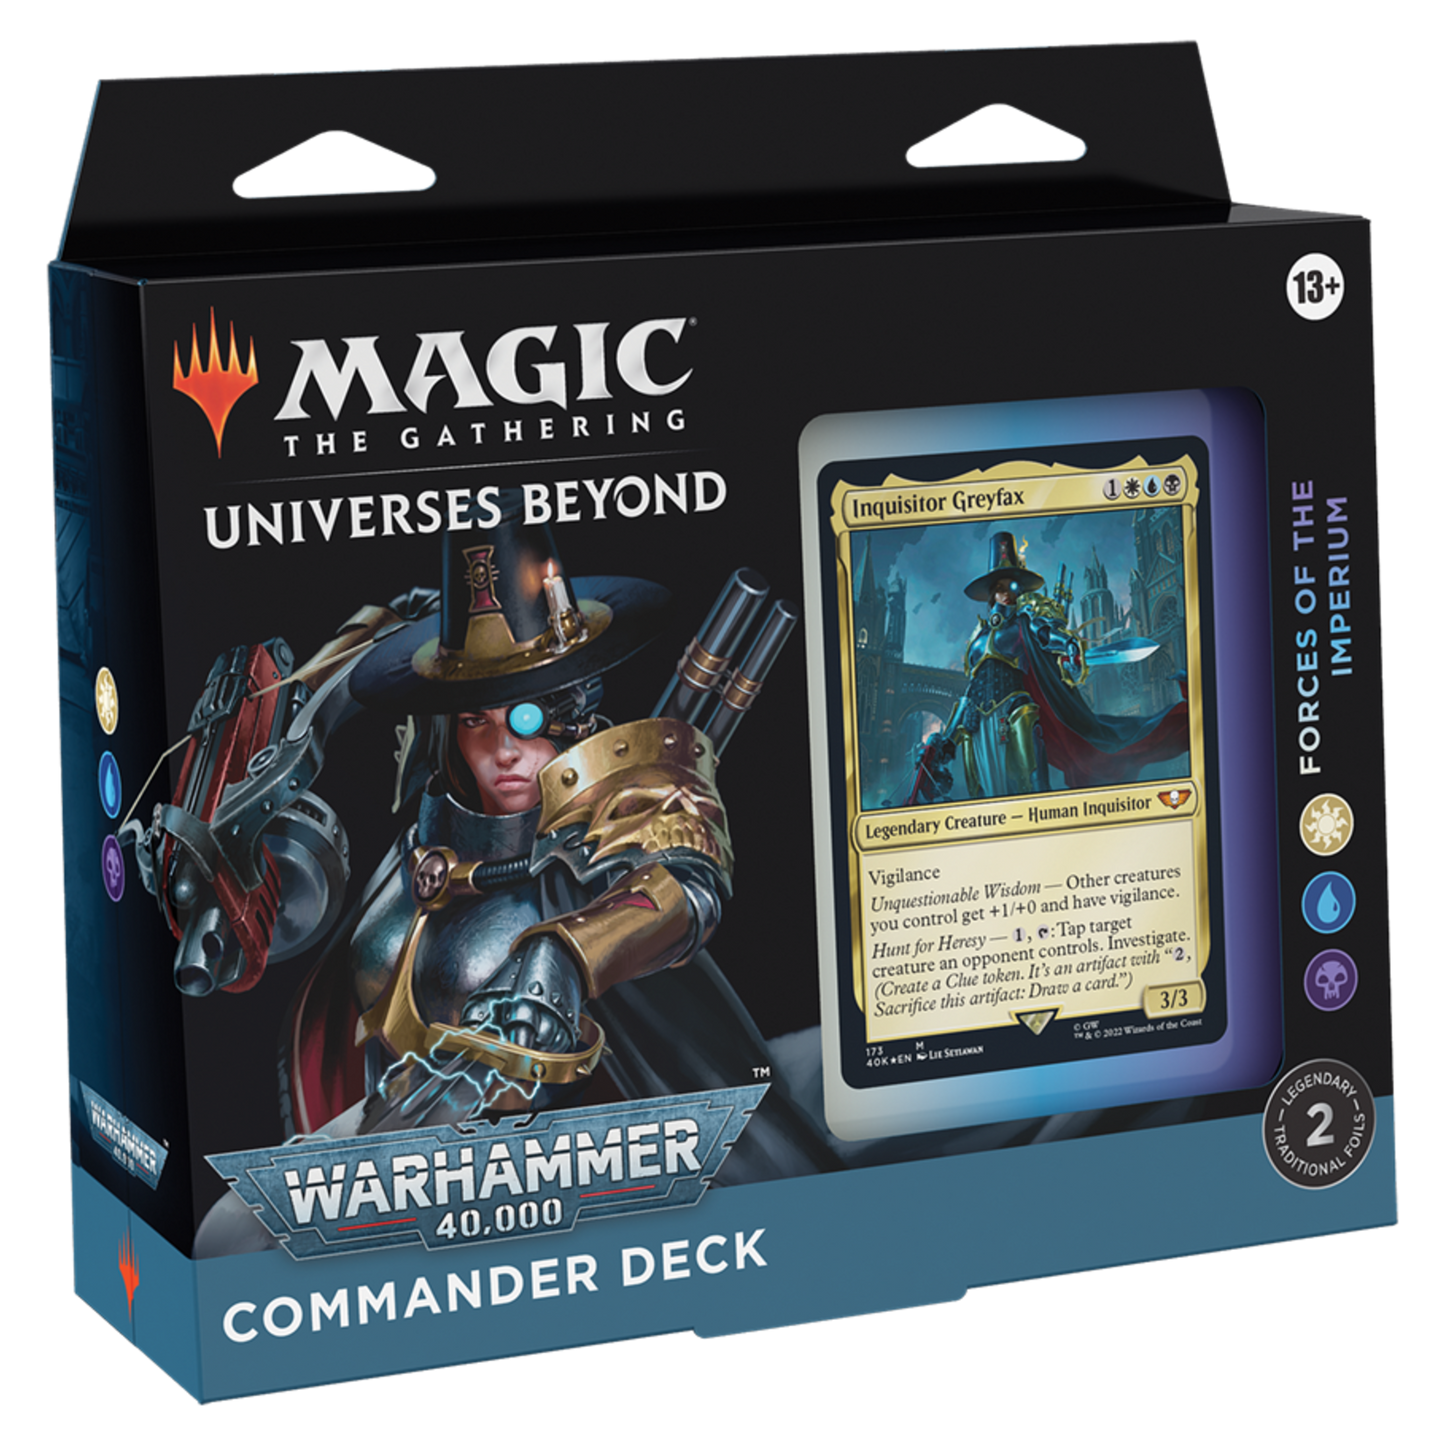 Magic The Gathering - Universes Beyond - WARHAMMER 40,000 - Forces of the Imperium Commander Deck